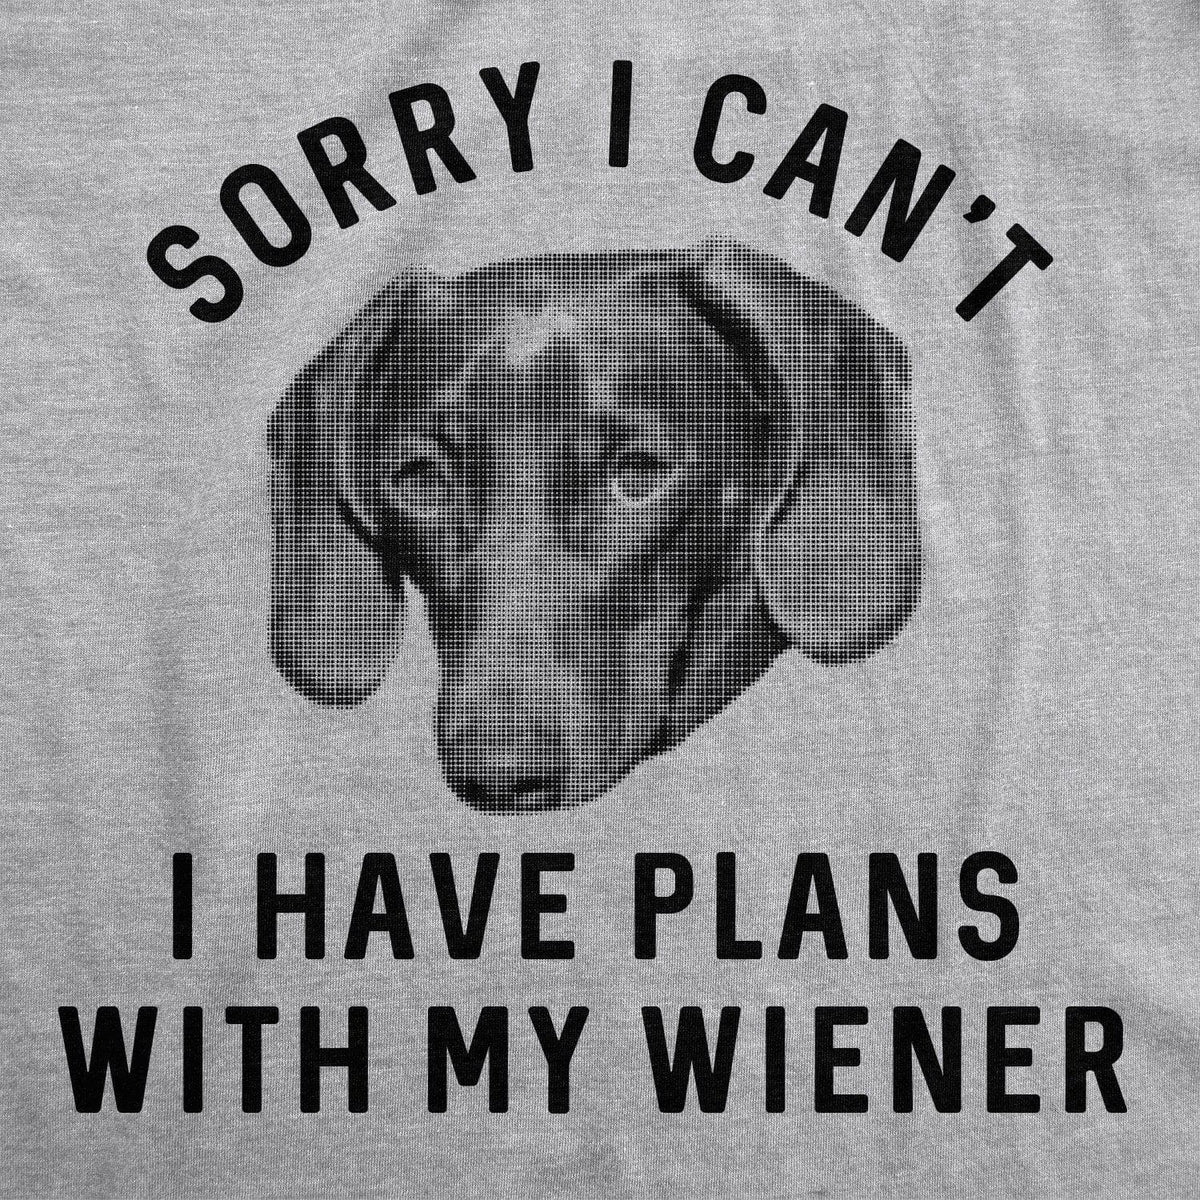 Sorry I Can&#39;t I Have Plans With My Wiener Men&#39;s Tshirt - Crazy Dog T-Shirts